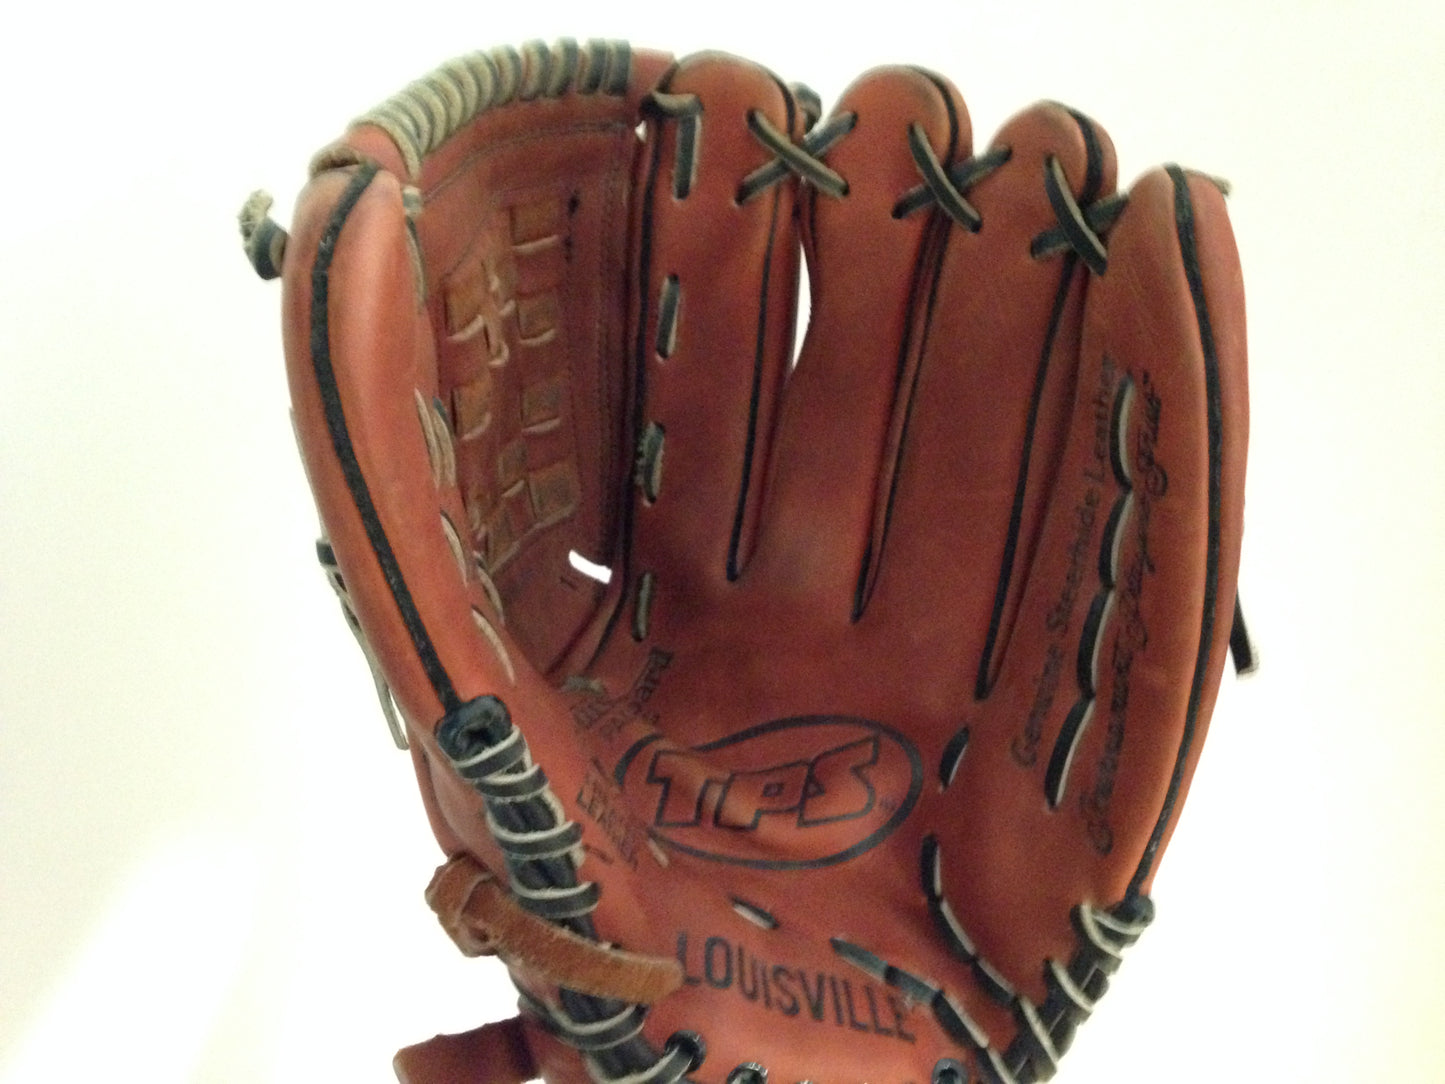 Baseball Glove Adult Size 13.5  inch Louisville Slugger TPS Leather Bruise Guard Brown Left Hand Excellent Quality Condition